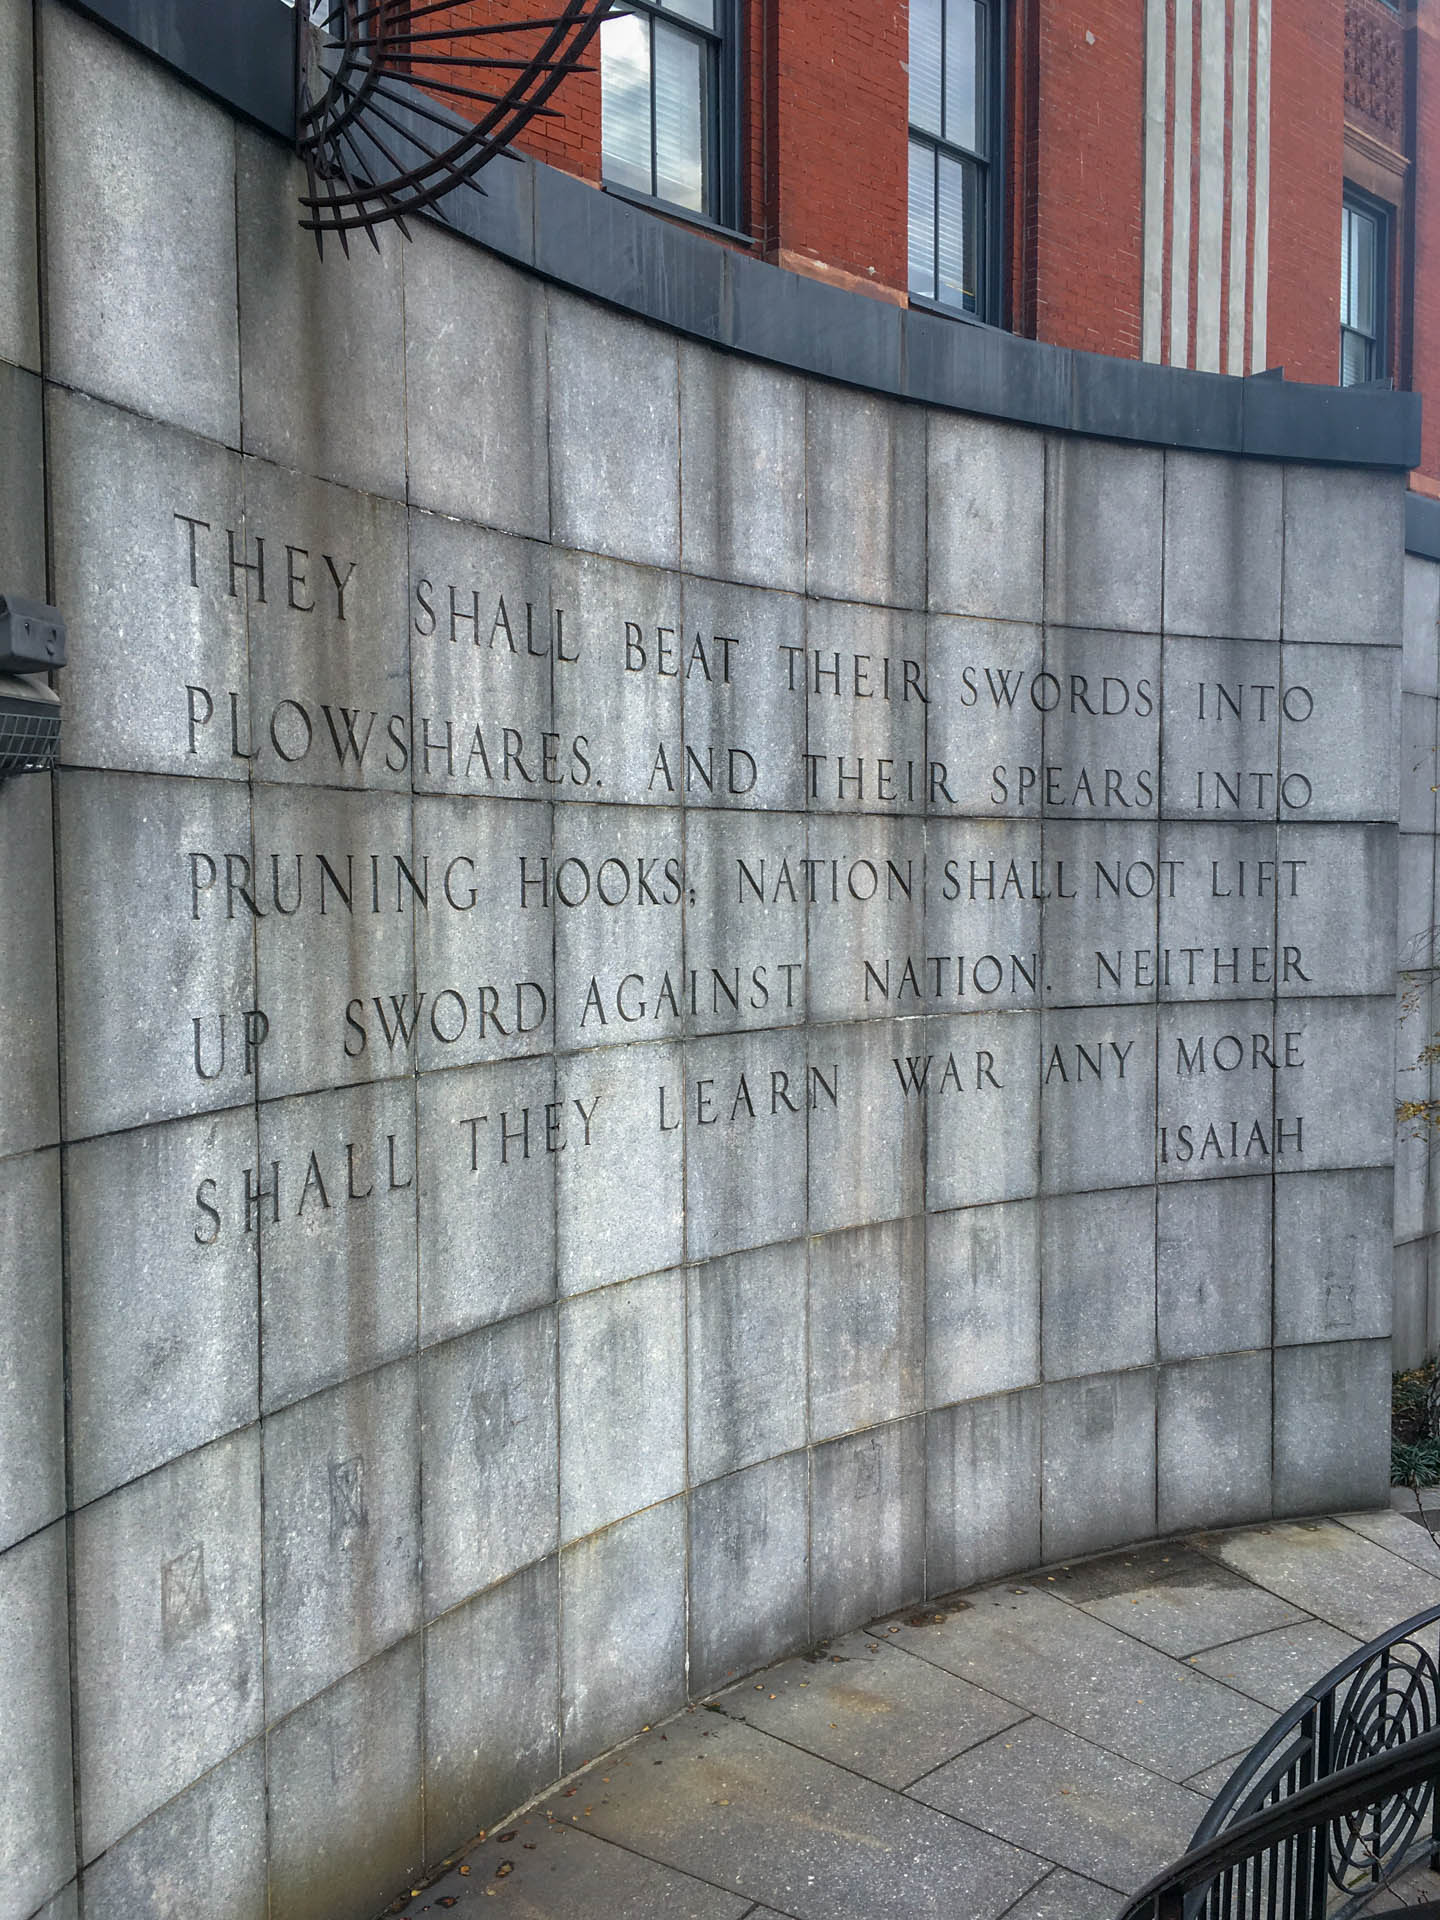 Stone wall with a quote inscribed that reads, "They shall beat their swords into plowshares and their spears into running hooks. National shall not lift up sword against nation. Neither shall they learn war any more." Isaiah